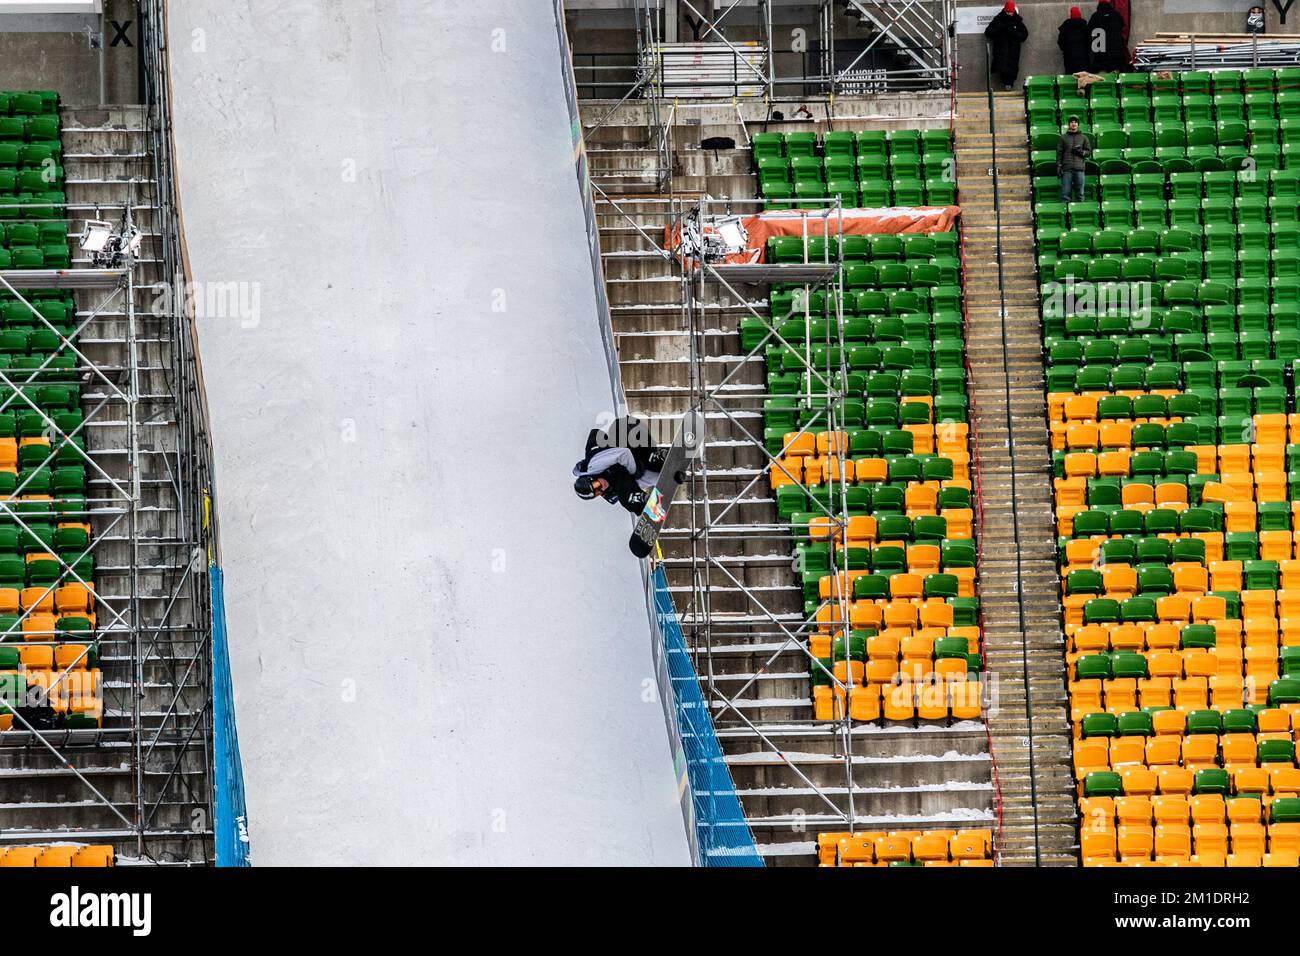 Jacob Legault (CAN) performs during the Style Experience Snowboard Big Air World Cup competition at the Commonwealth Stadium. Stock Photo